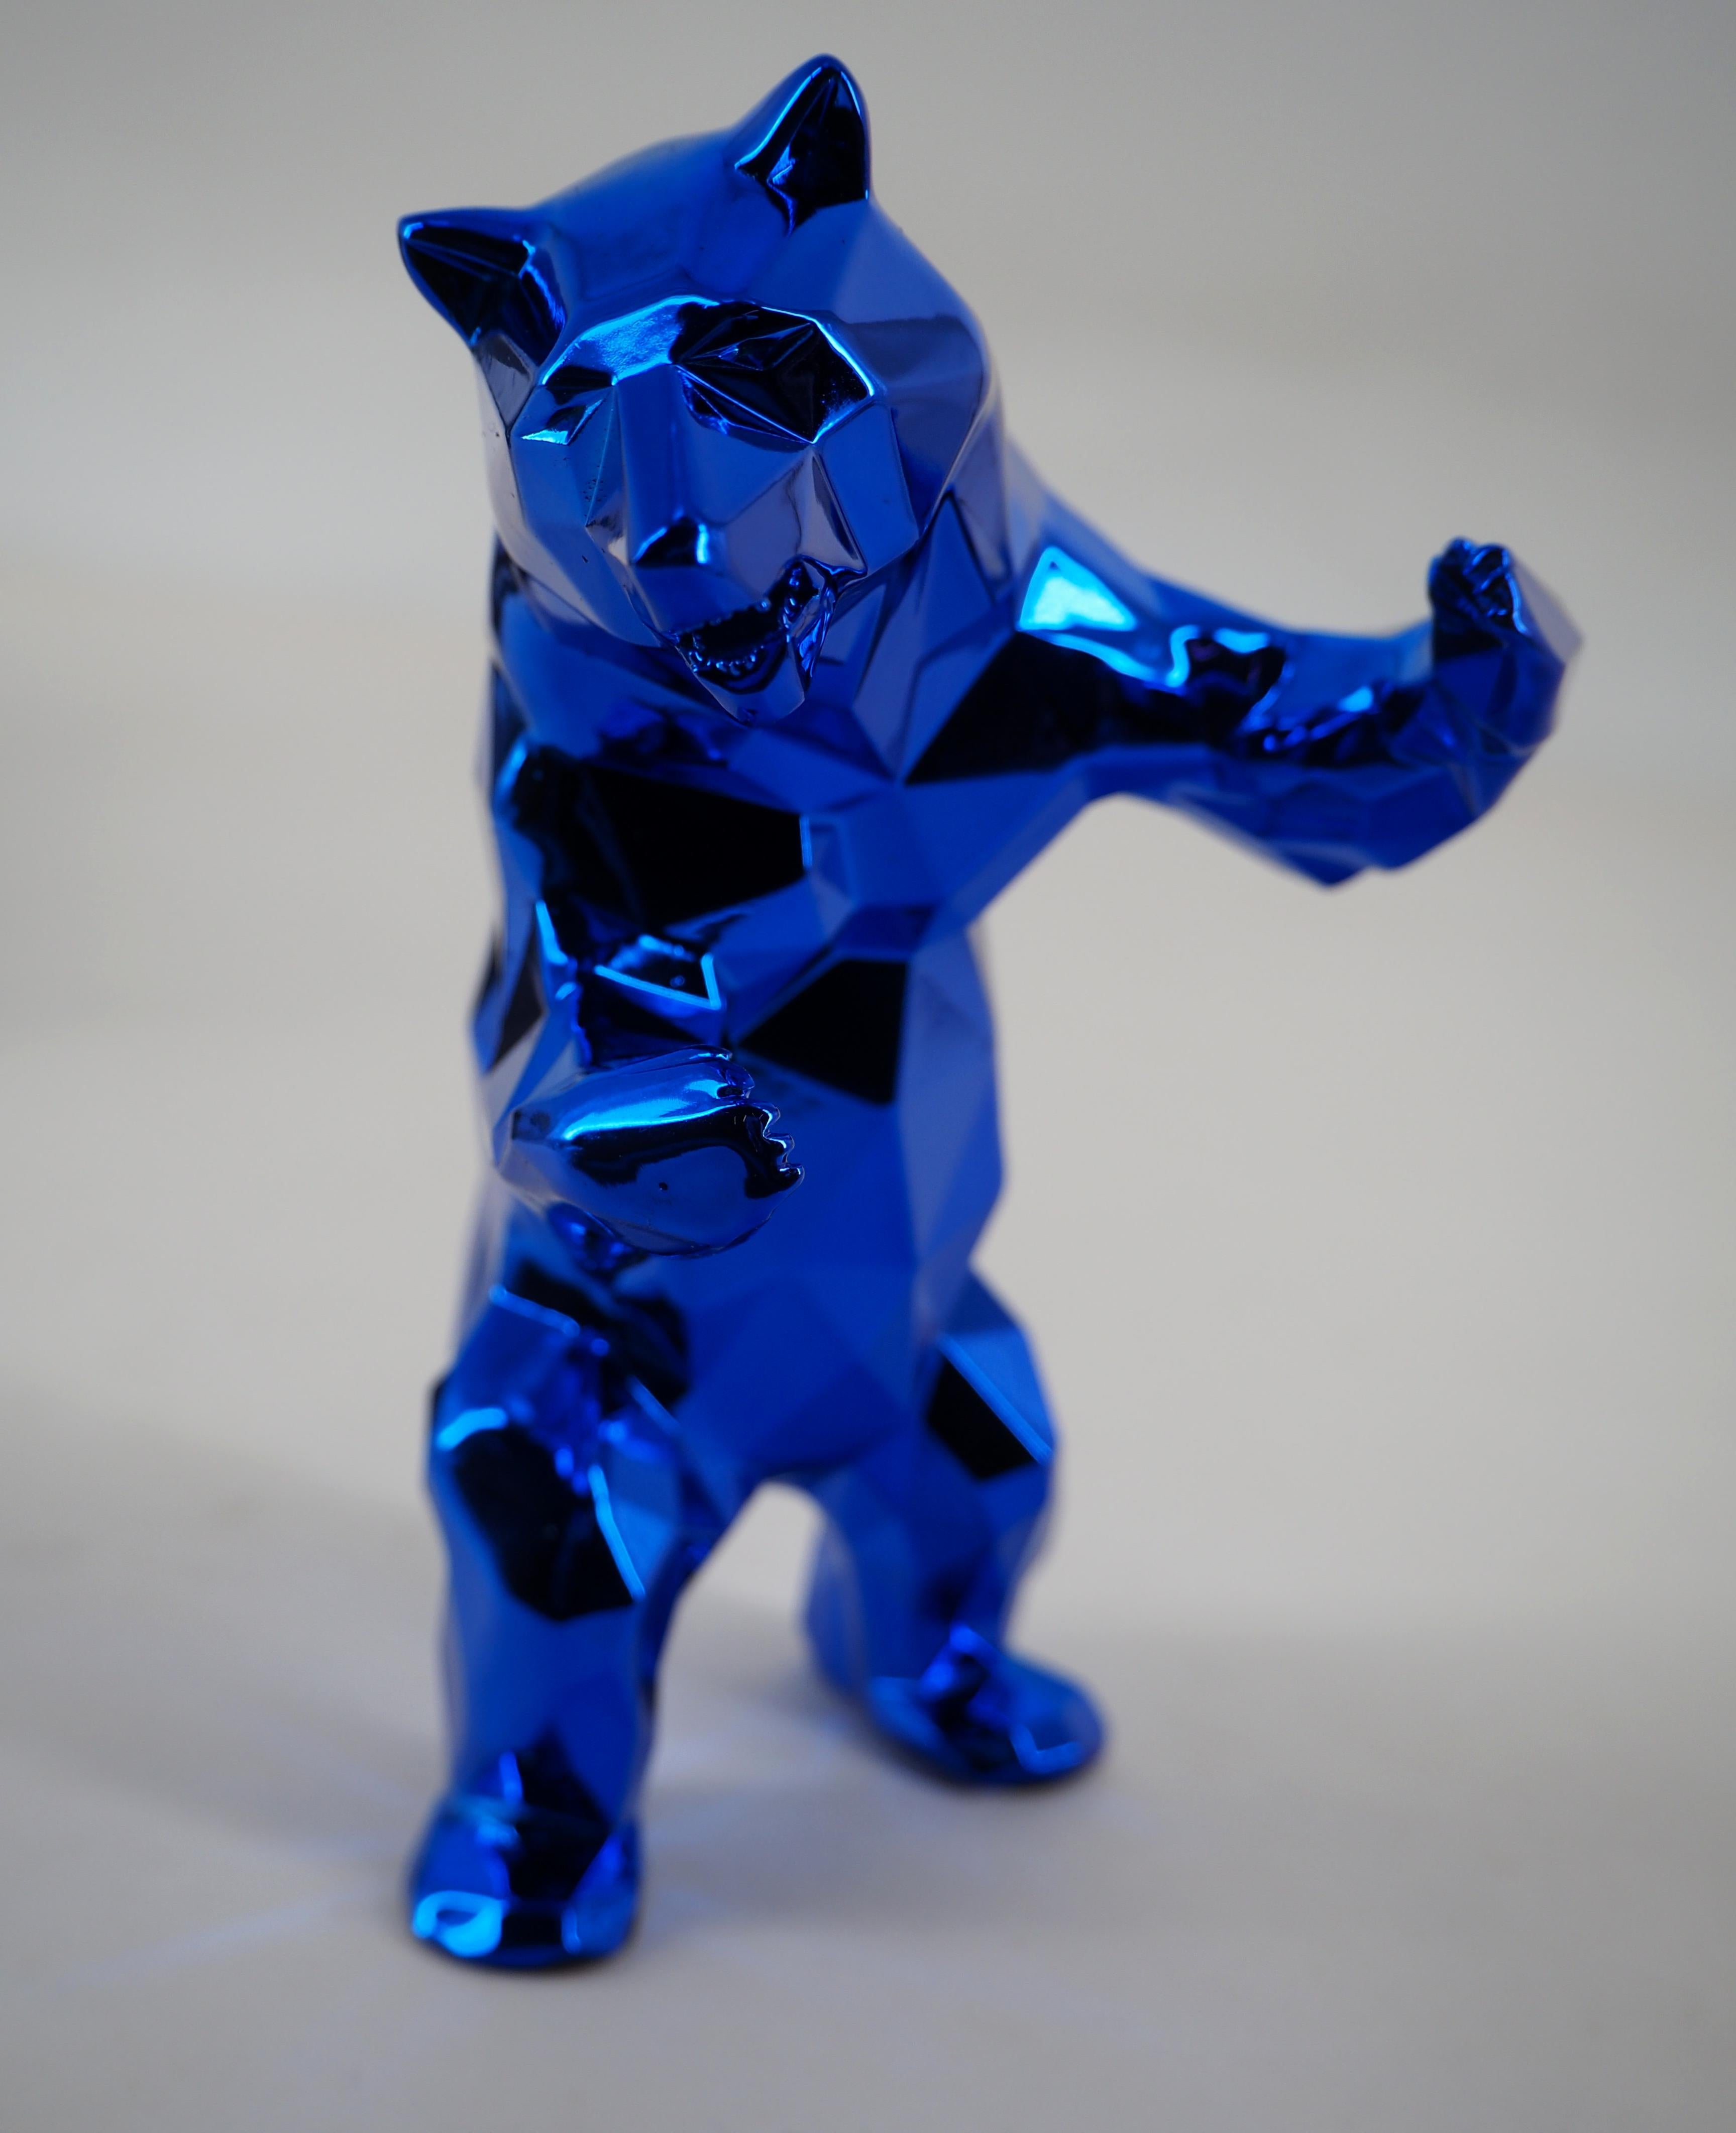 Richard ORLINSKI
StandingBear (Blue)

Sculpture in resin
Metallic Blue
About 13.5 x 8 cm (c. 5.5 x 3.5 in)
Presented in original box with certificate

Excellent condition